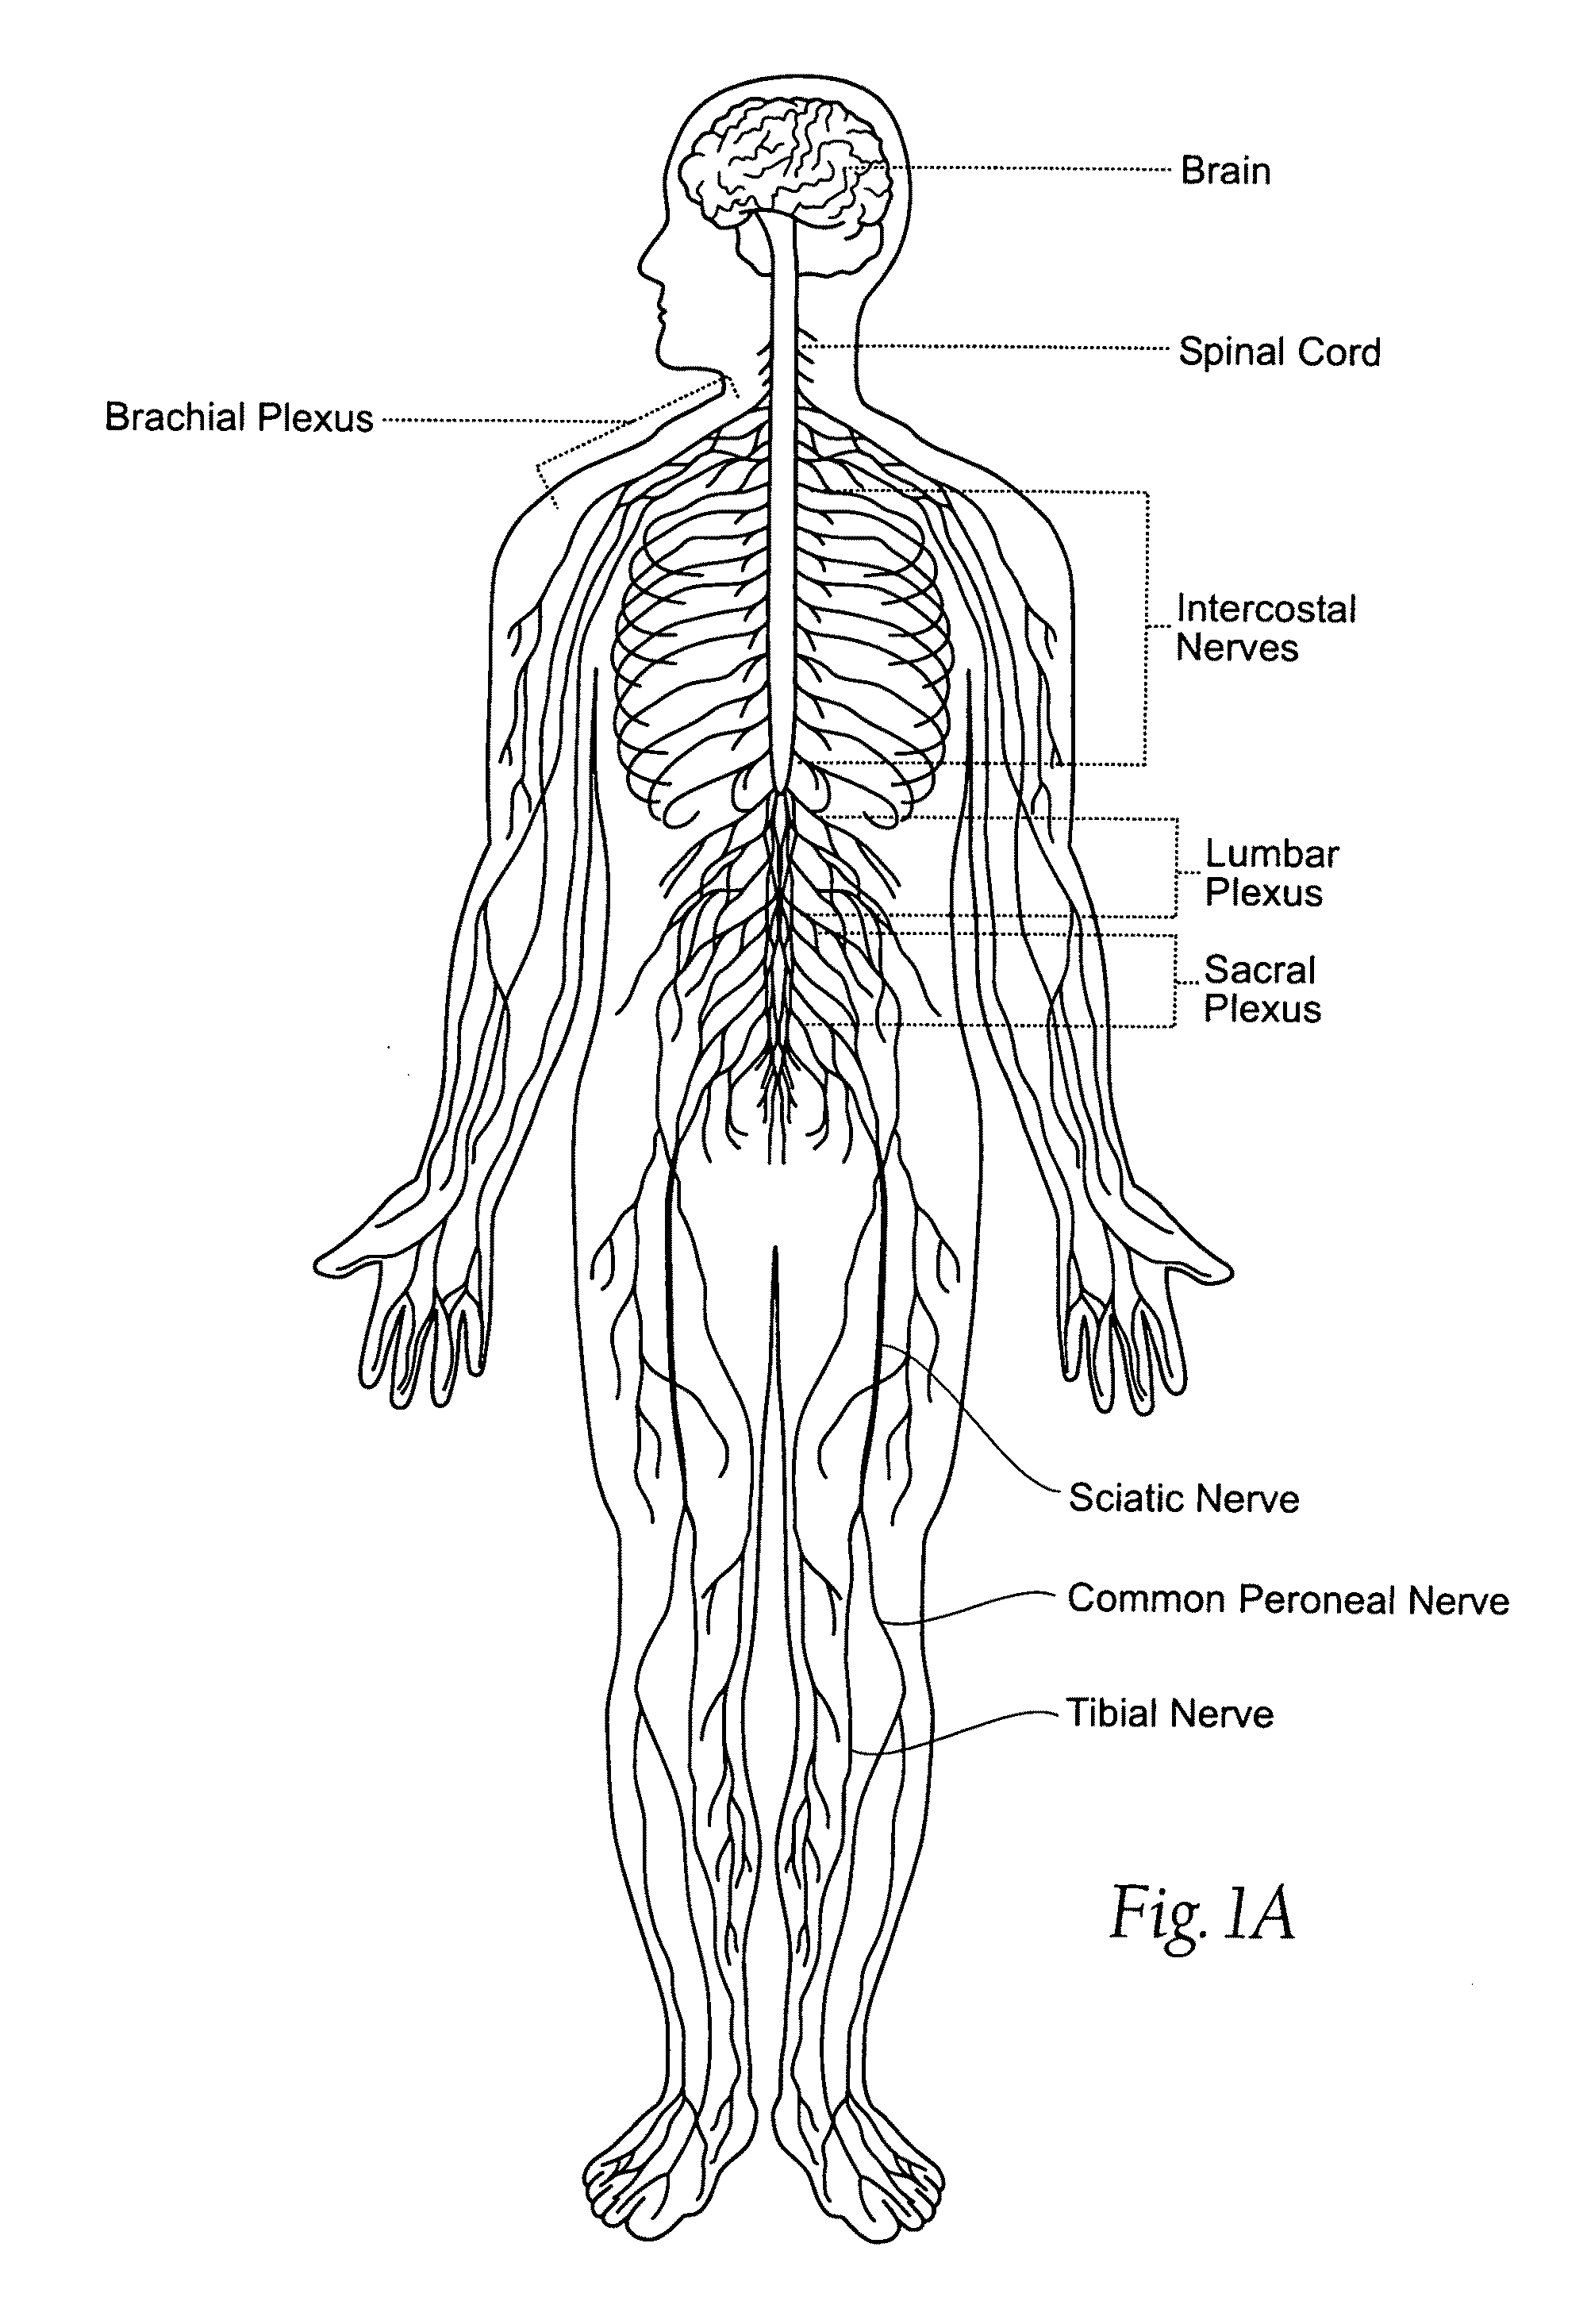 Systems and methods to place one or more leads in tissue to electrically stimulate nerves of passage to treat pain